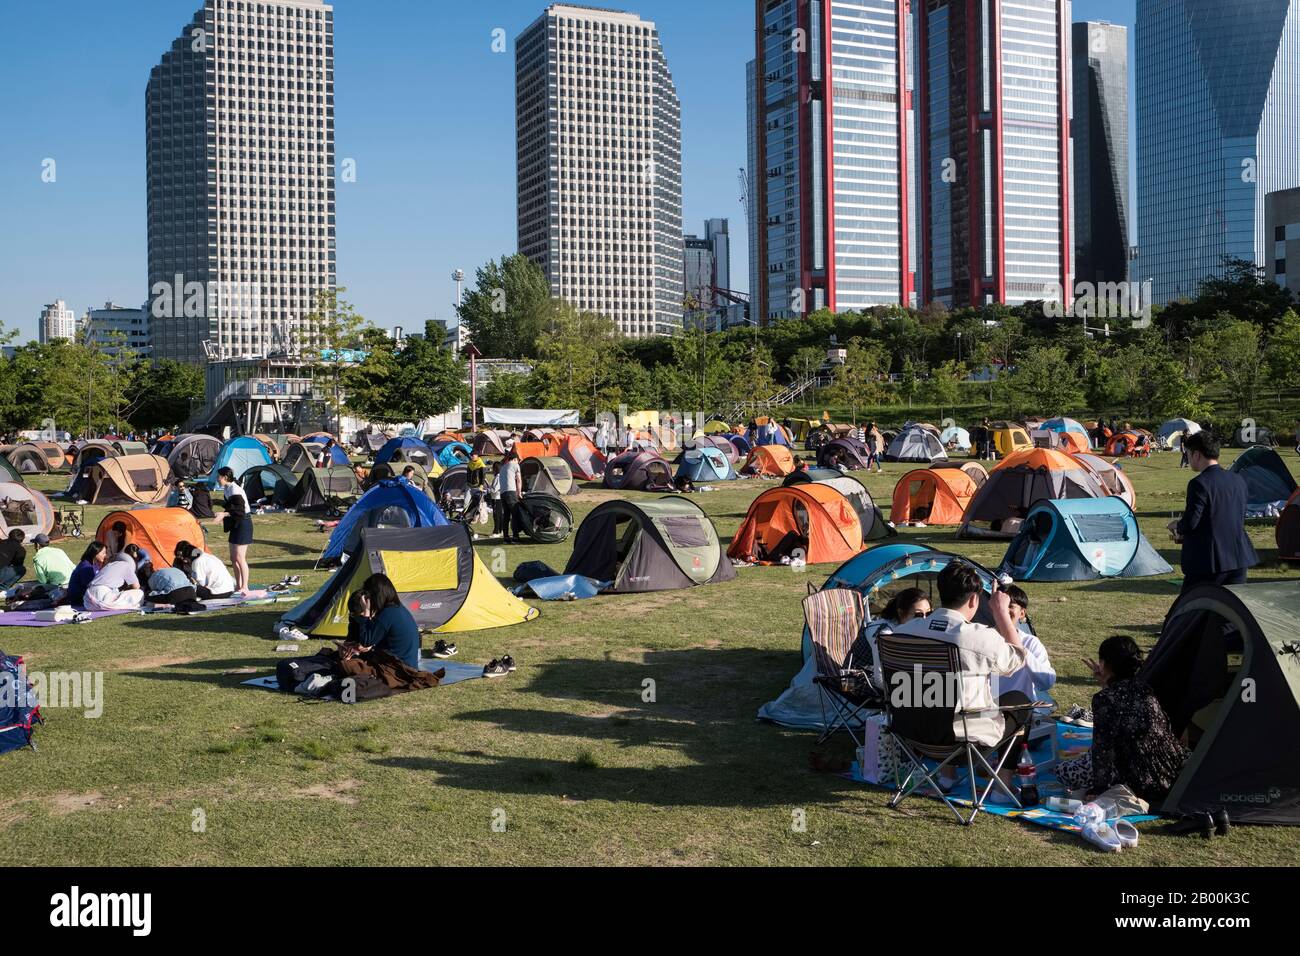 South Korea, Seoul: rental tents set up on weekends in Yeouido Hangang Park, on the banks of the Han River Stock Photo